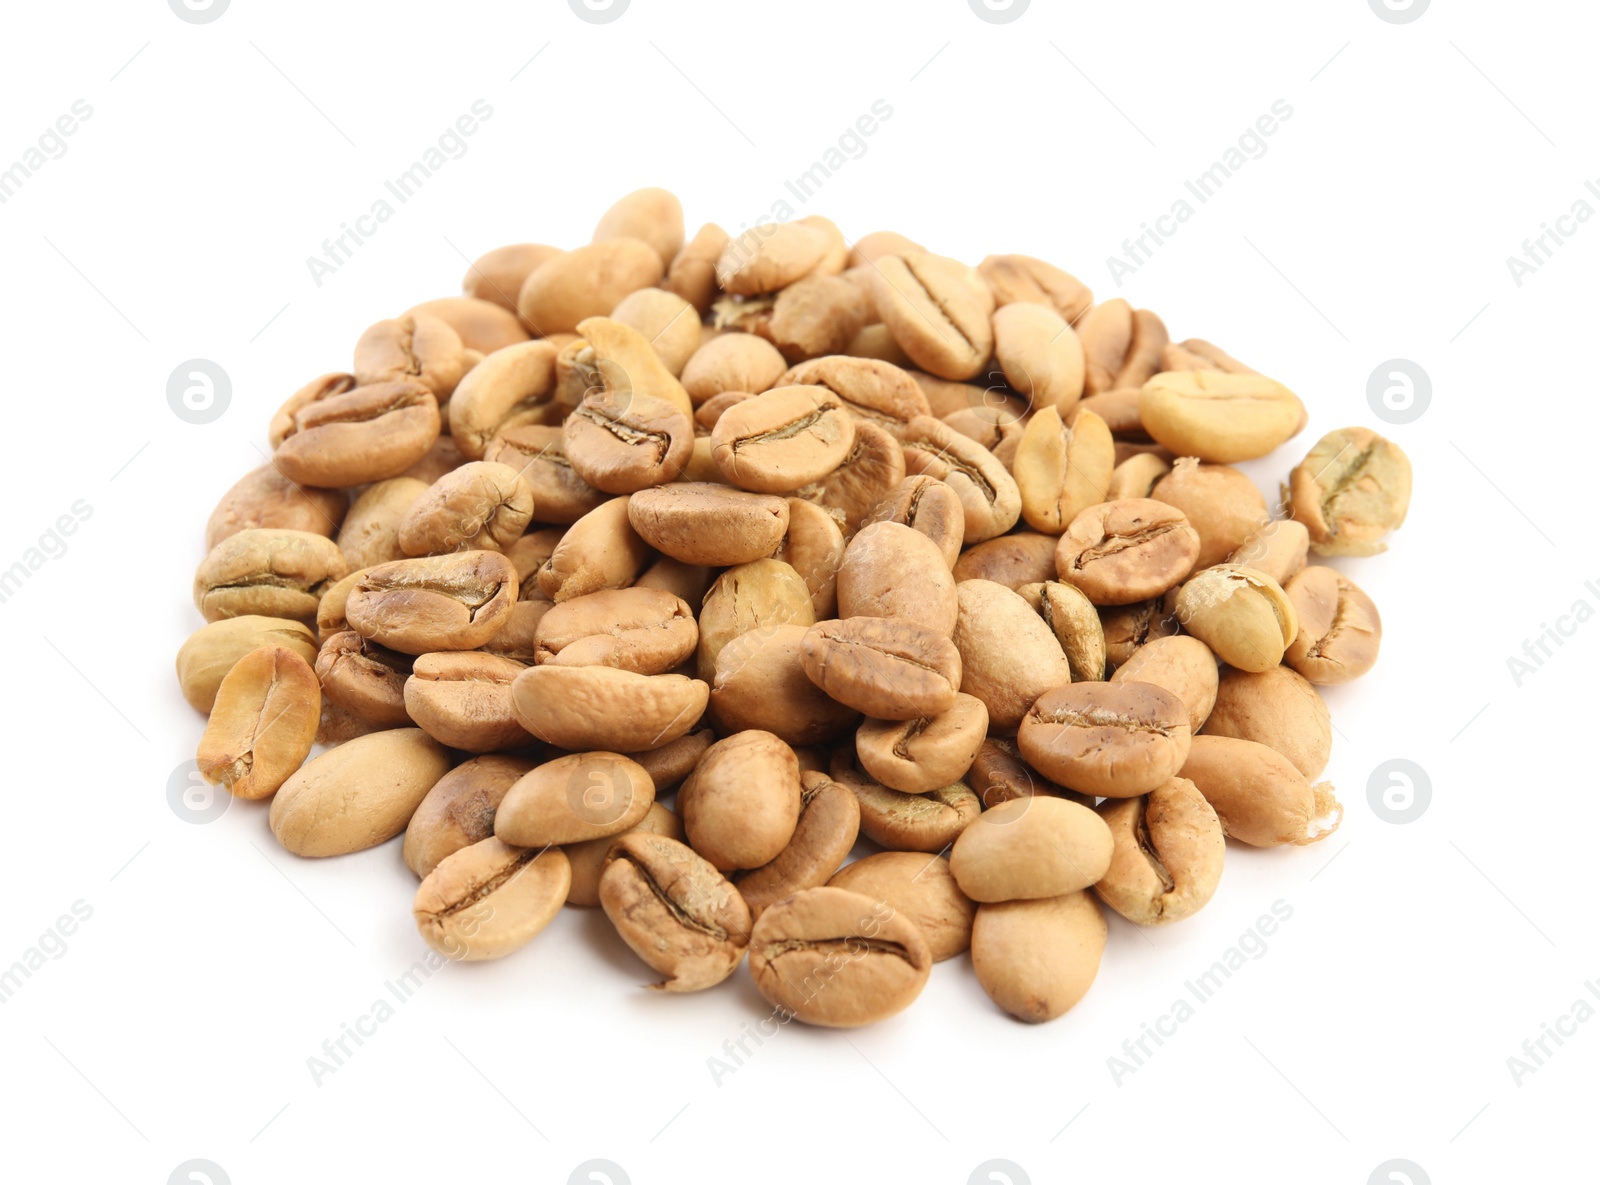 Photo of Heap of roasted coffee beans isolated on white